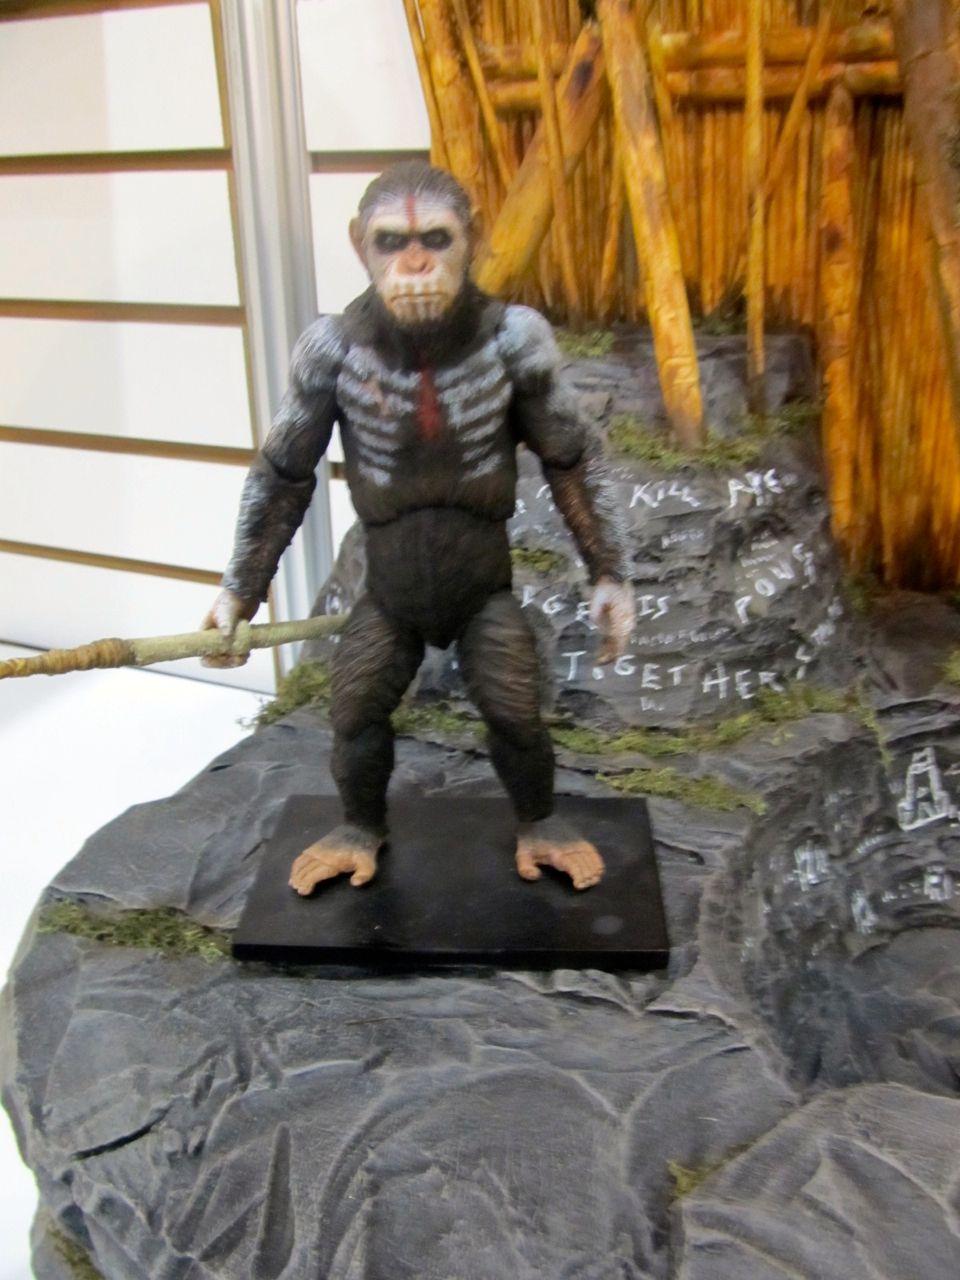 Hr_neca_dawn_of_the_planet_of_the_apes_8